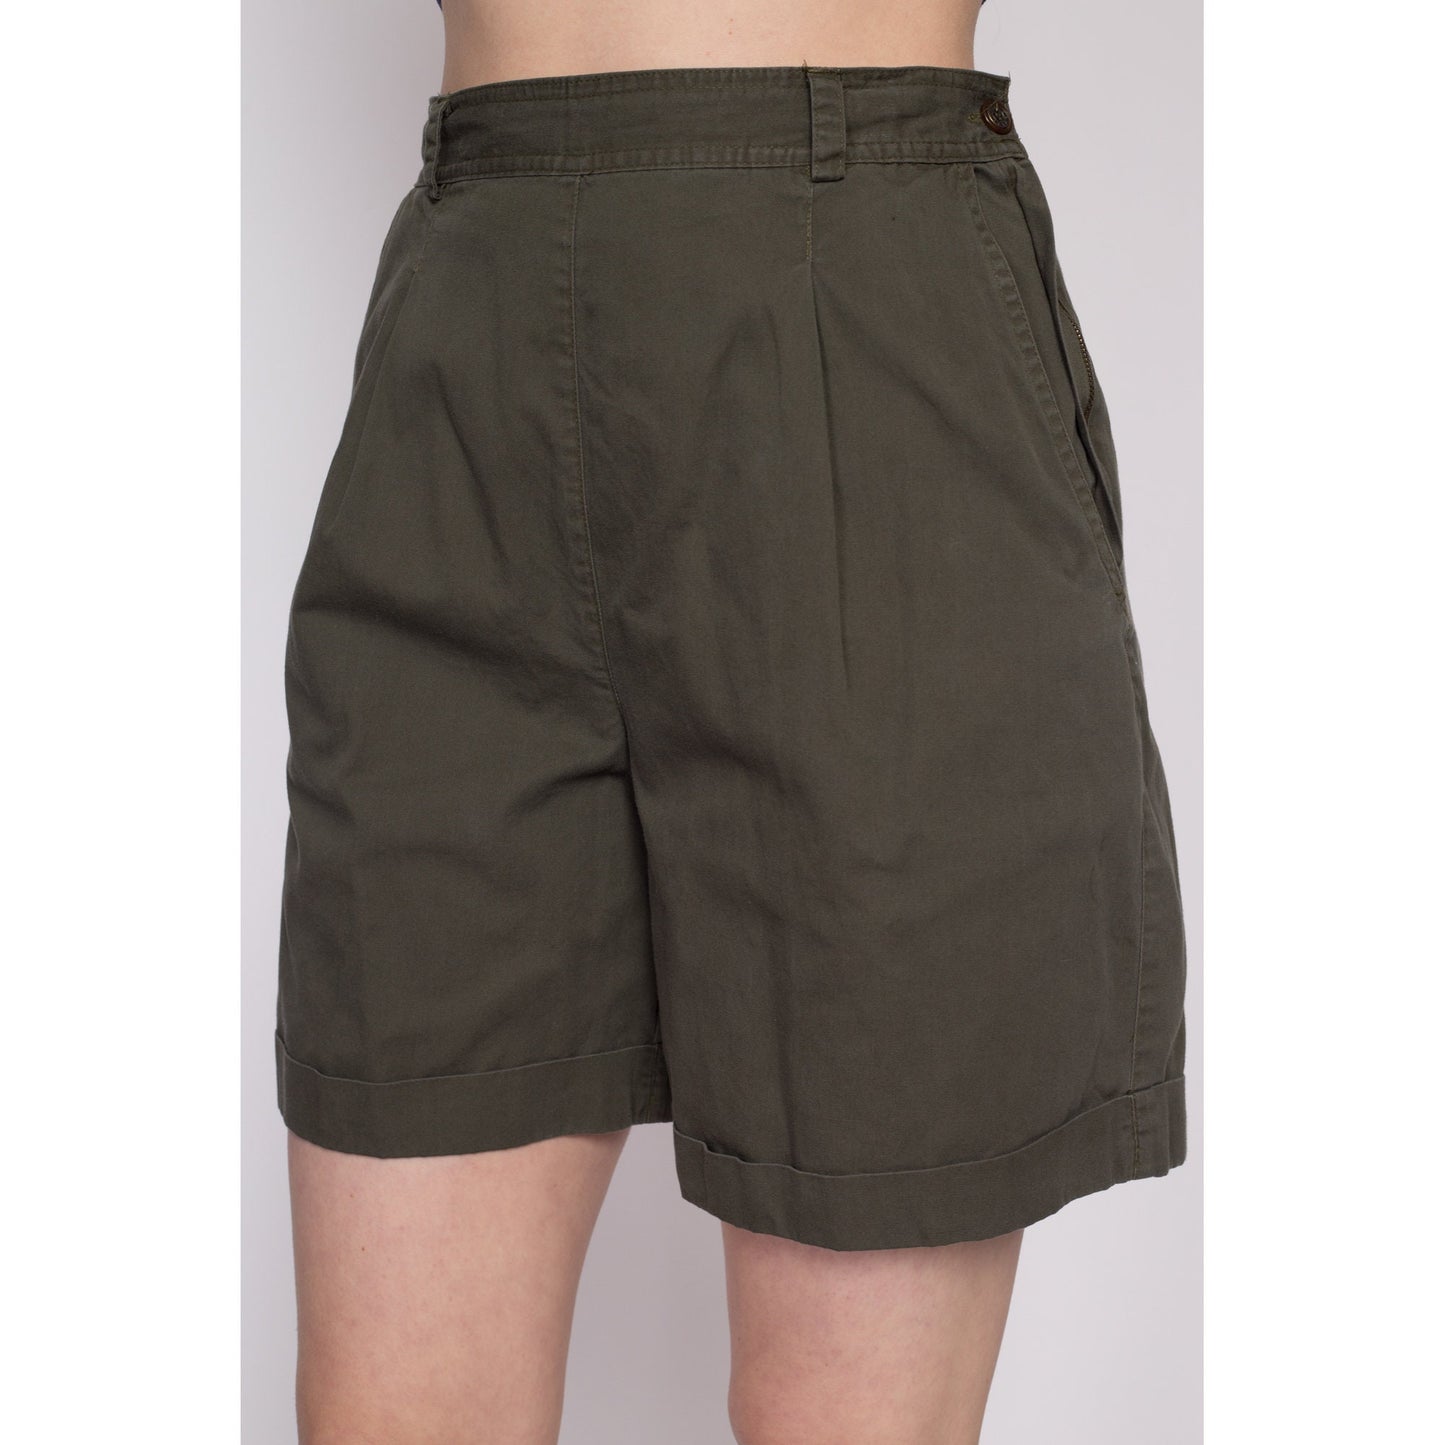 90s Olive High Waisted Pleated Shorts - Medium, 27.5" | Vintage White Stag Cuffed Mom Shorts